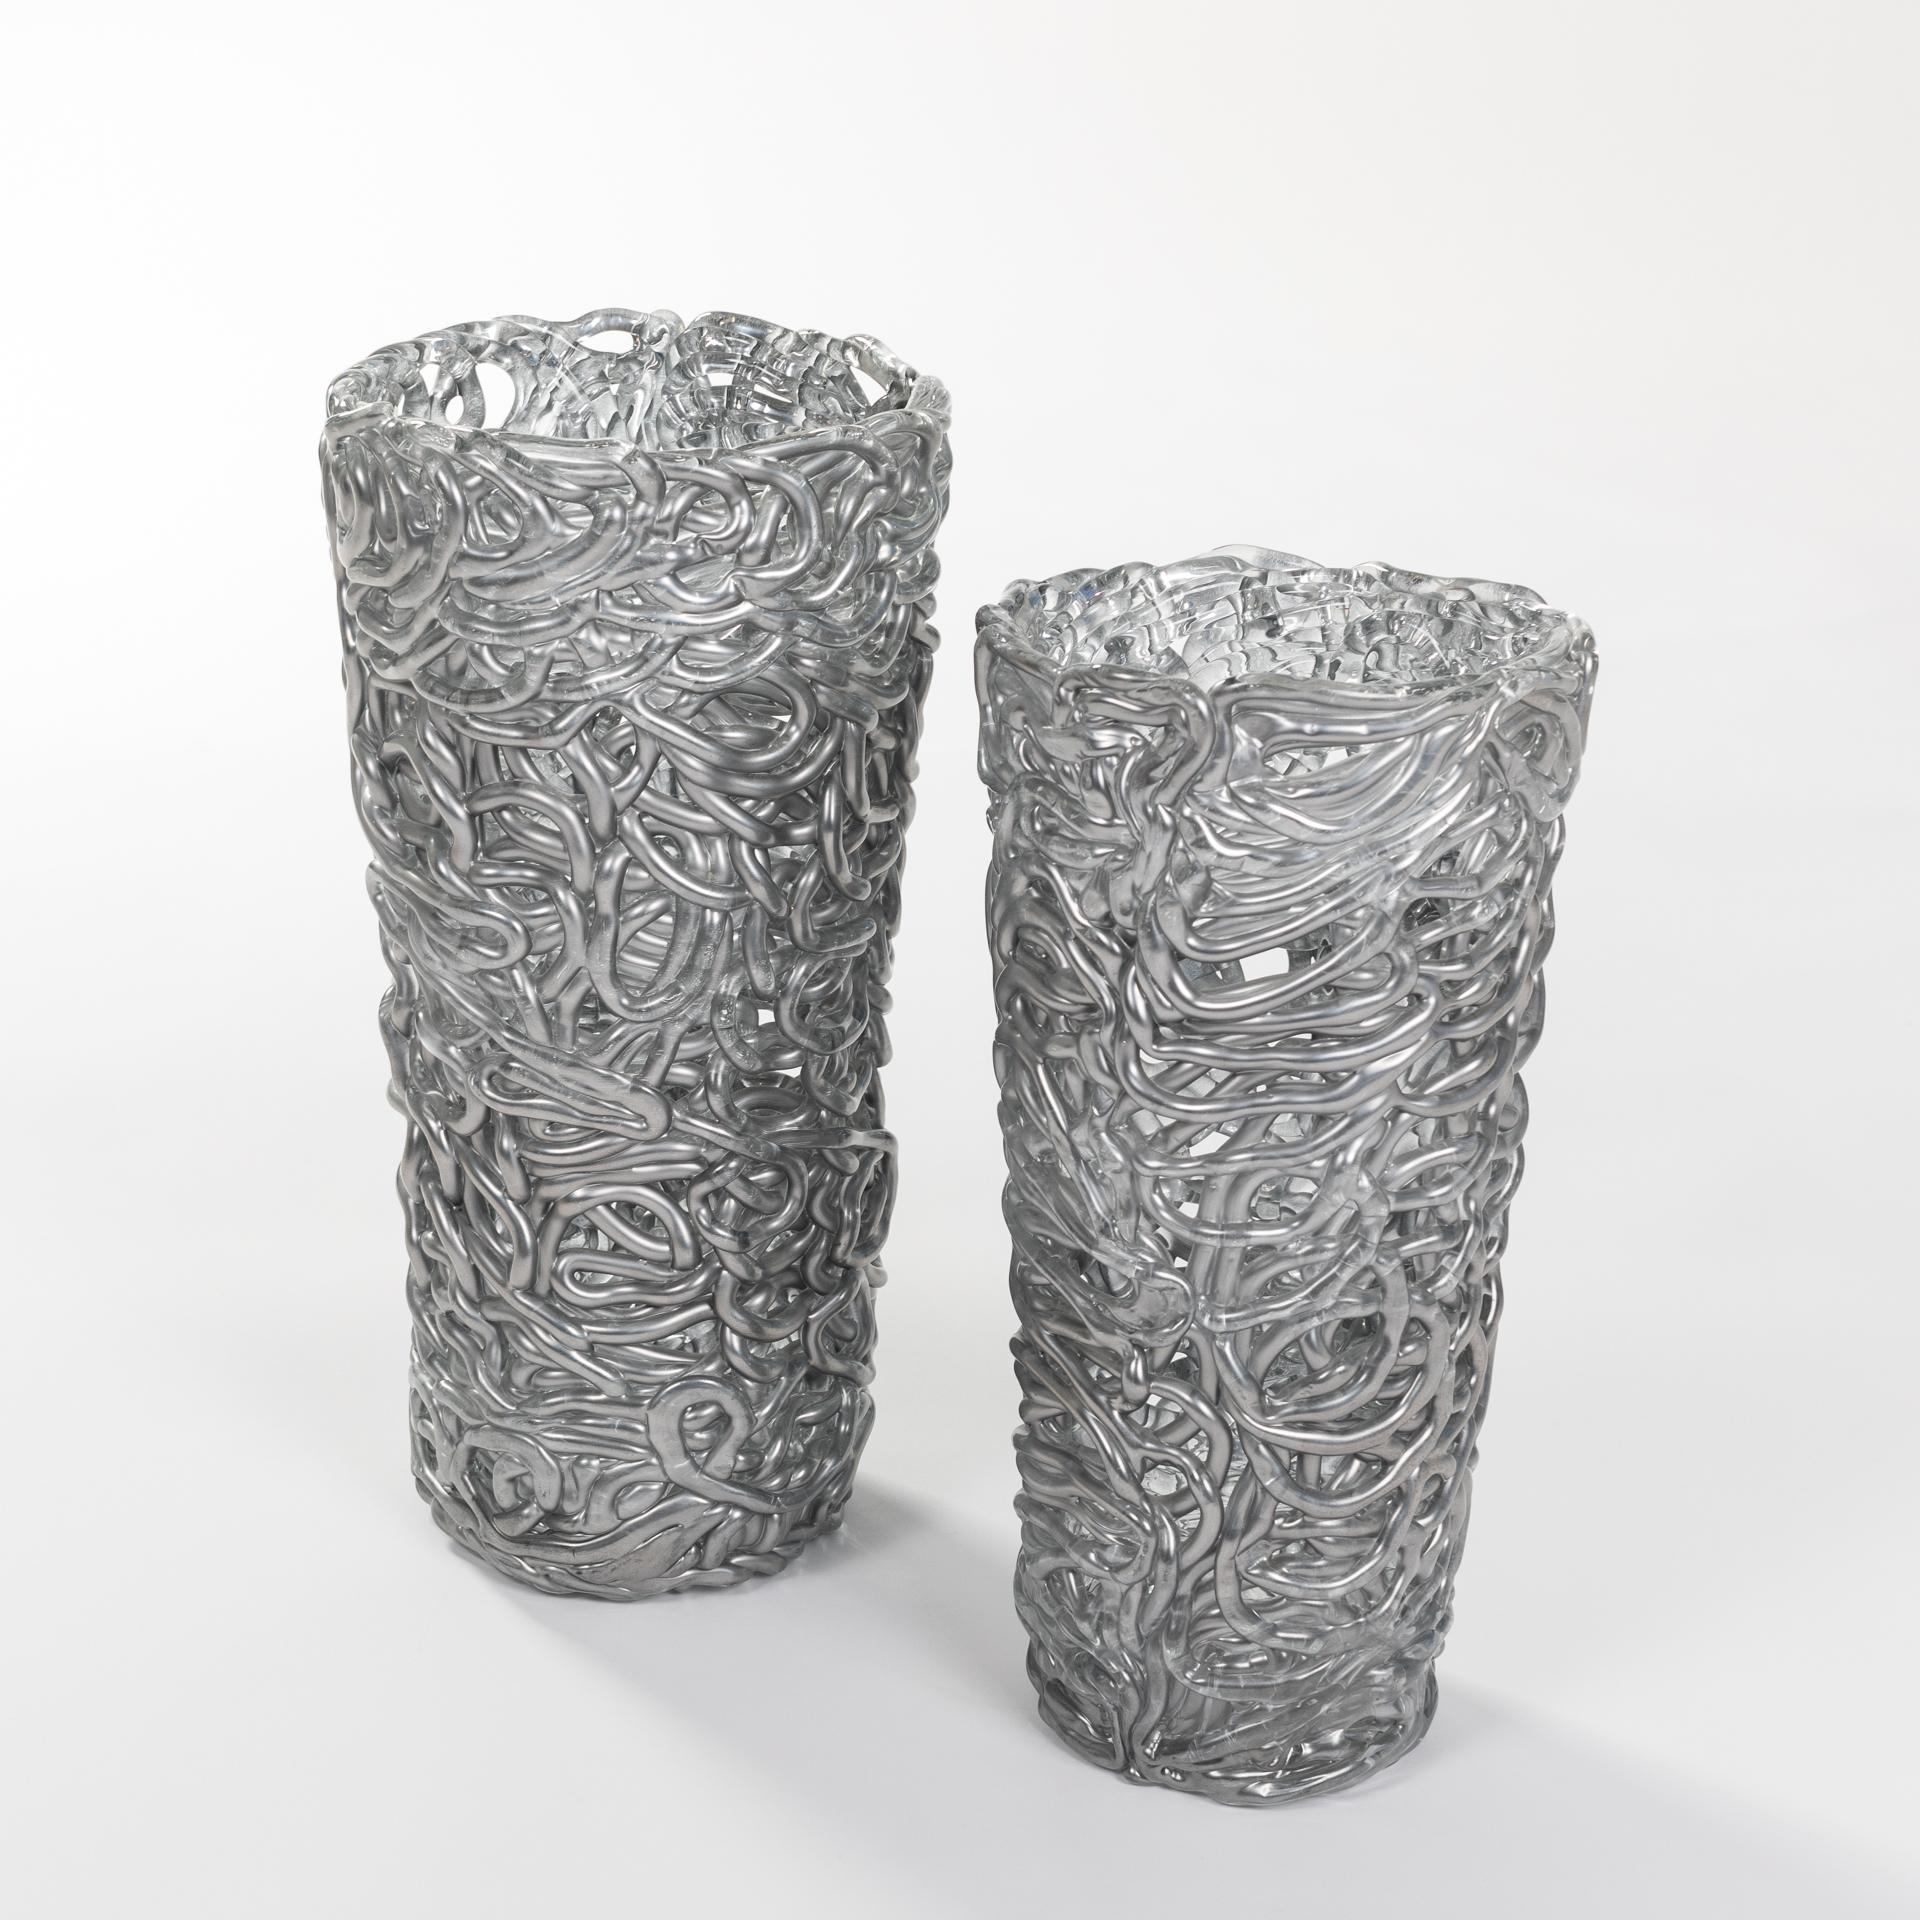 Exceptional pair of silver-colored Murano glass vases.
Intertwined glass veins shape the outer wall.
There is little space between the glass veins
Undamaged original condition.
Size 1: height 44cm x diameter above 22cm x diameter below 16cm
Size 2: